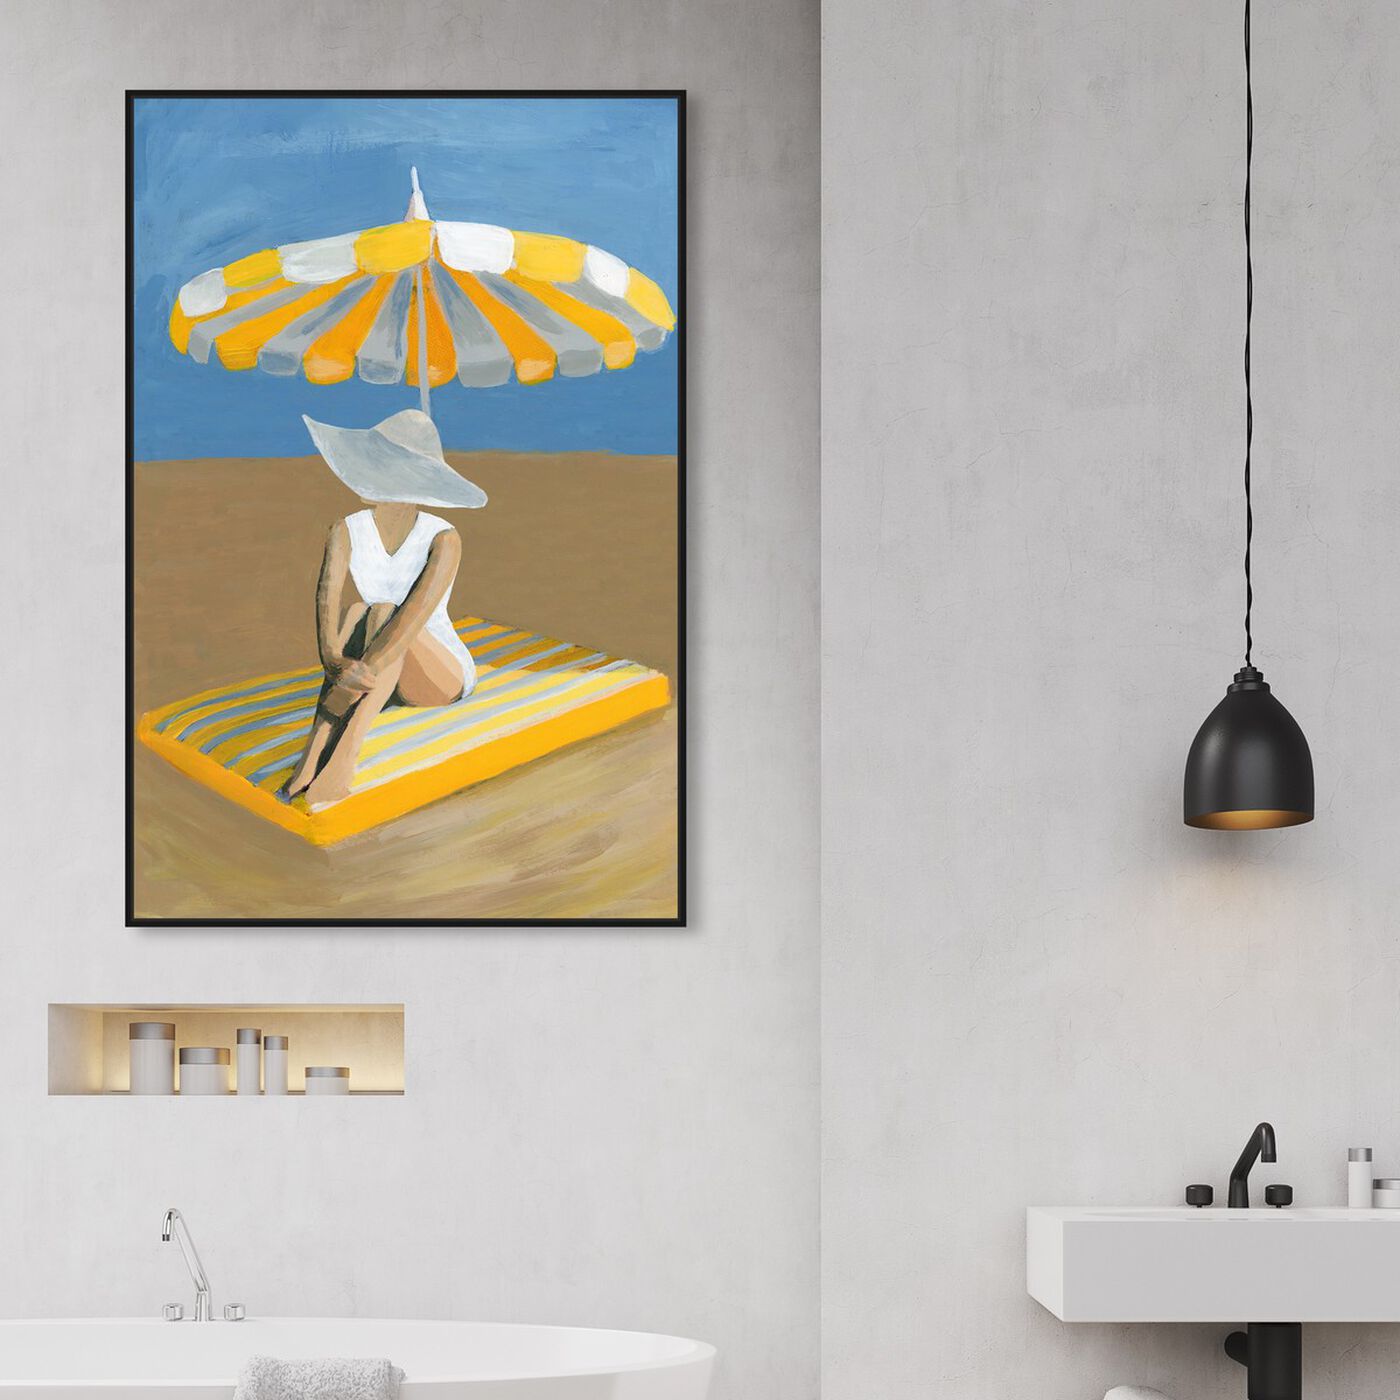 Hanging view of Yellow Umbrella featuring fashion and glam and swimsuit art.